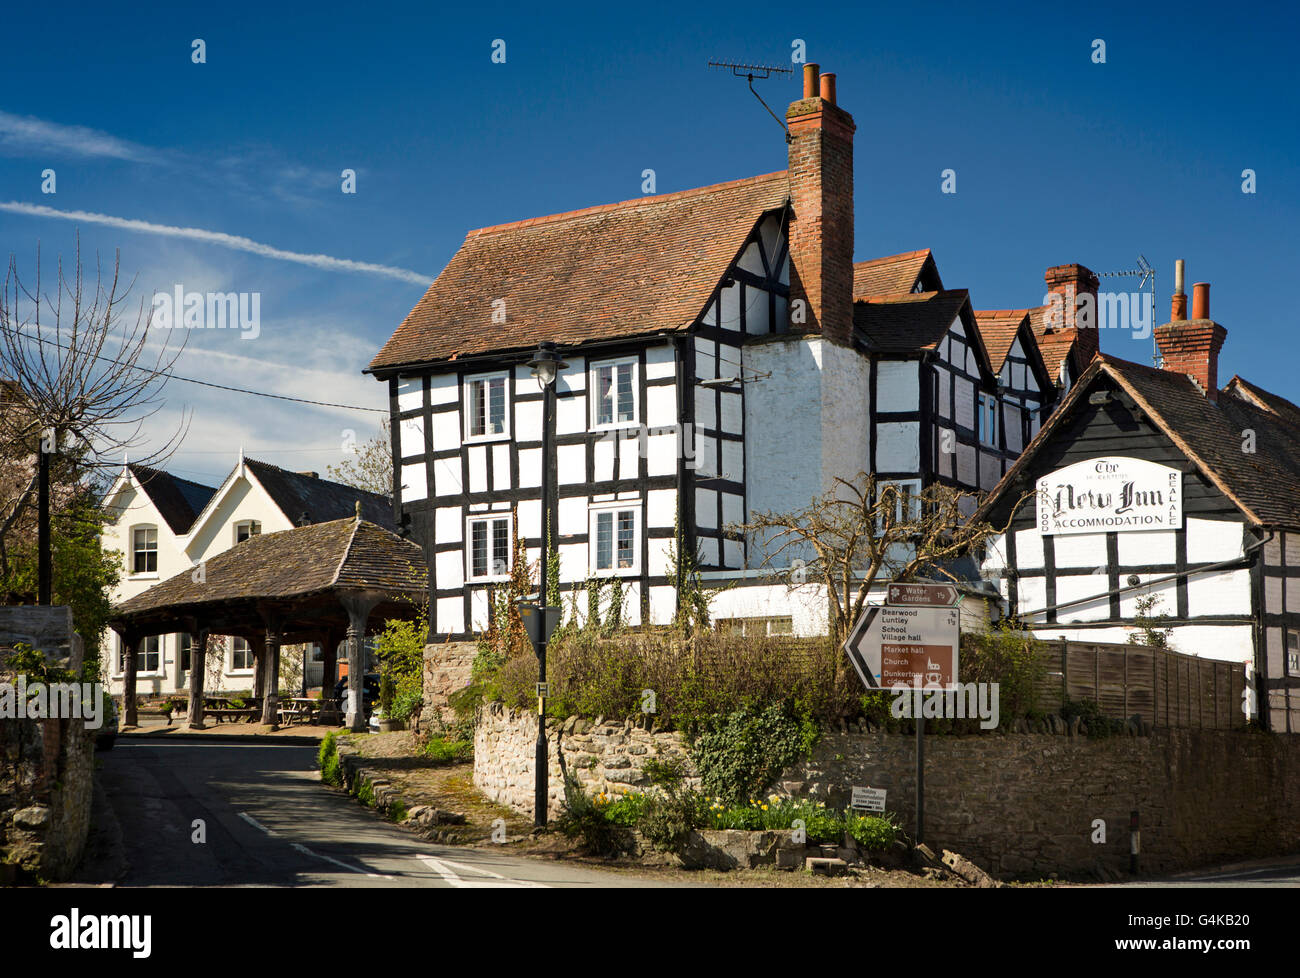 UK, England, Herefordshire, Pembridge, High Street, the New Inn and C16th wooden Market Hall Stock Photo